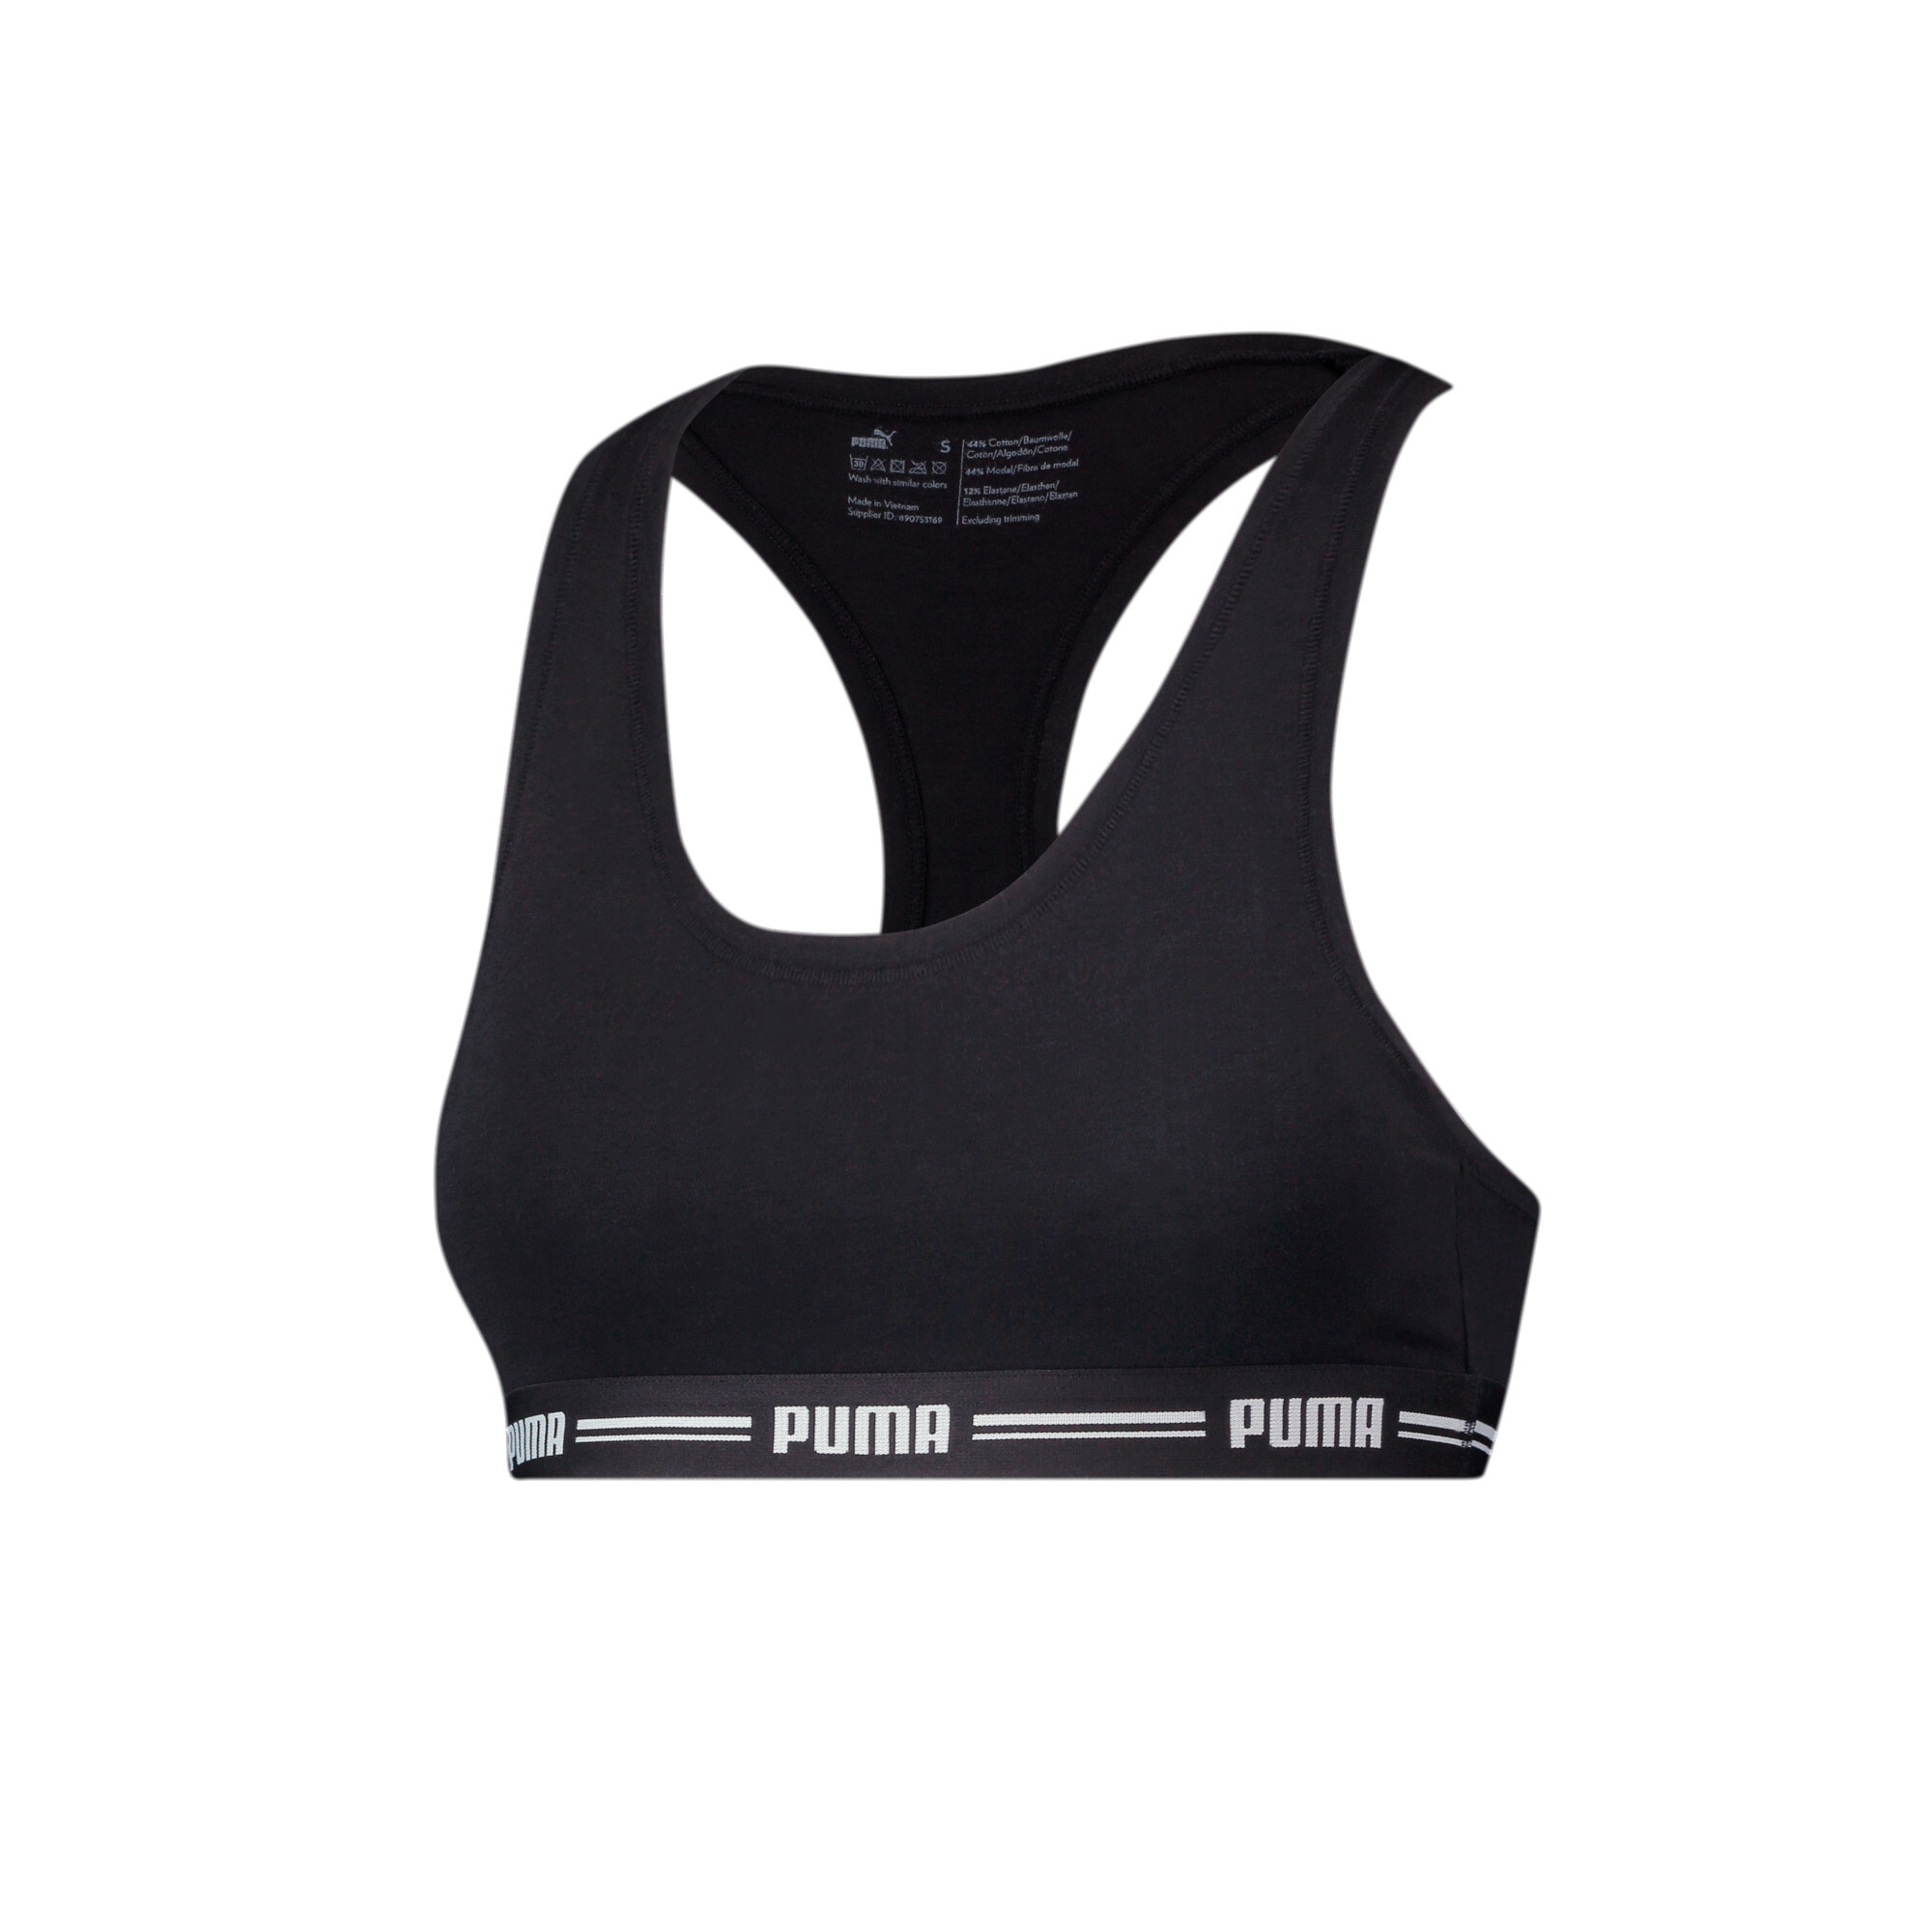 Women's PUMA Racer Back Top 1 Pack In Black, Size XS